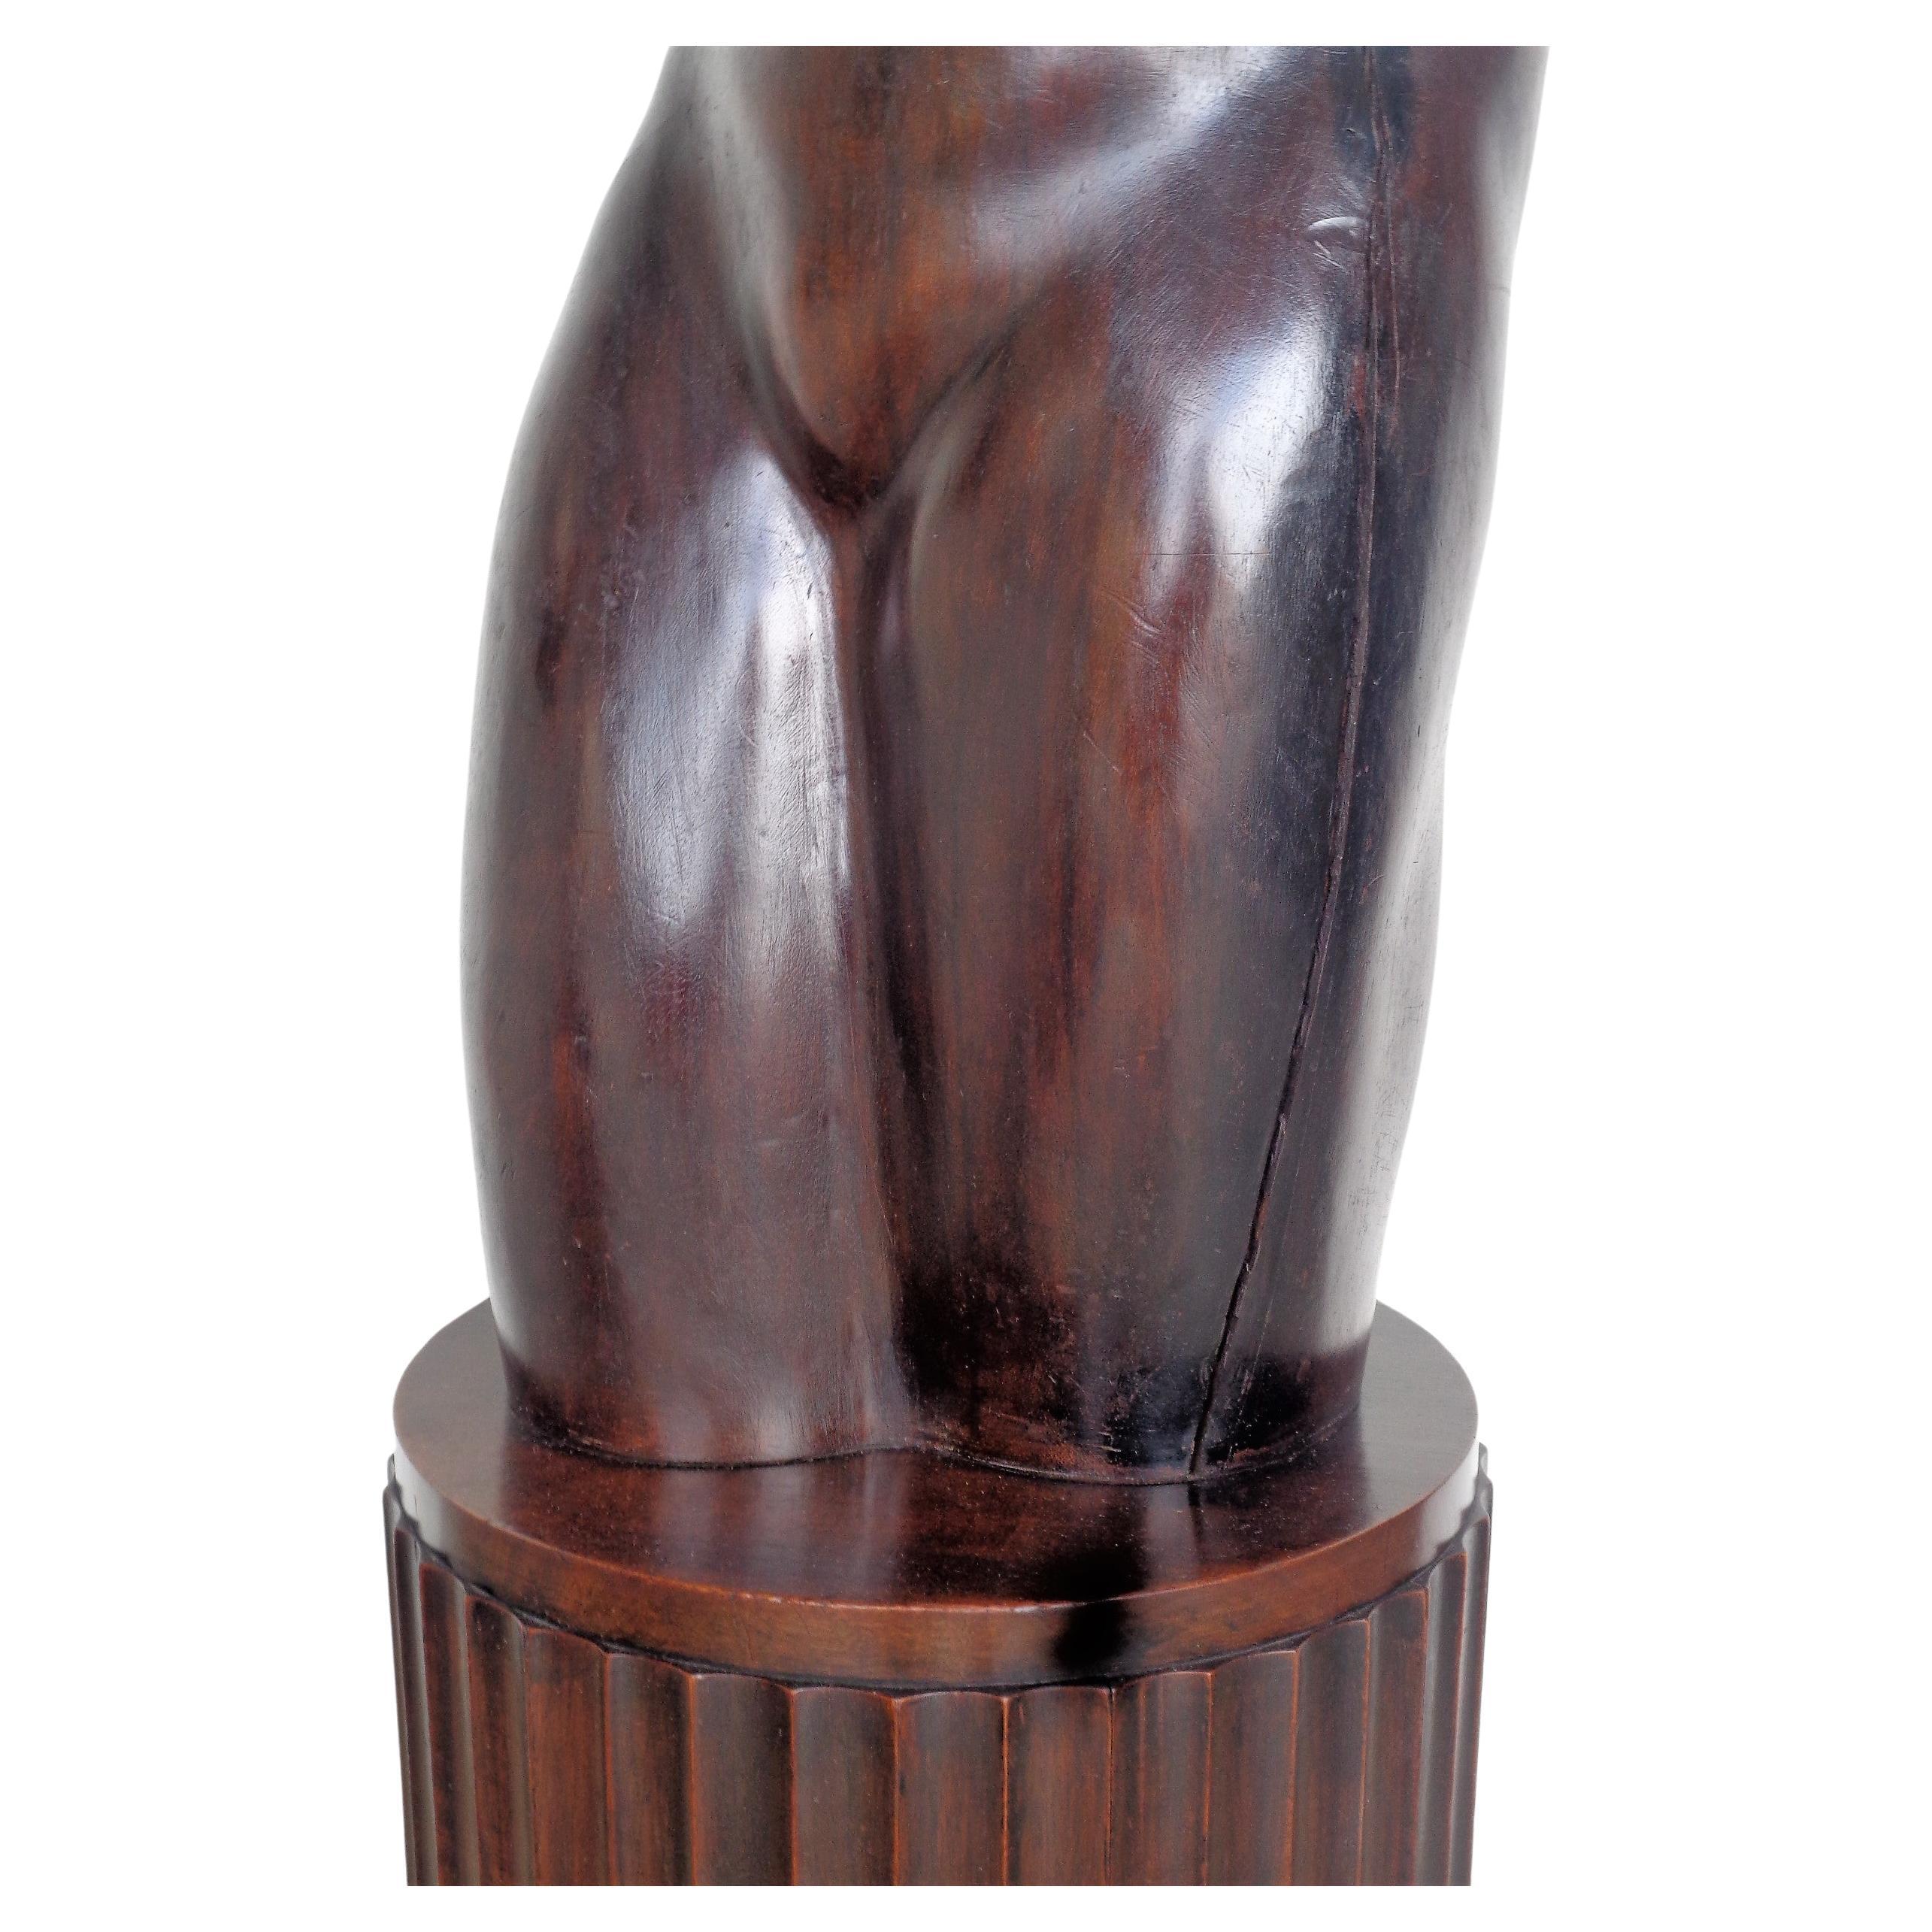 French Art Deco Walnut Sculpture Nude Woman, circa 1920 For Sale 9